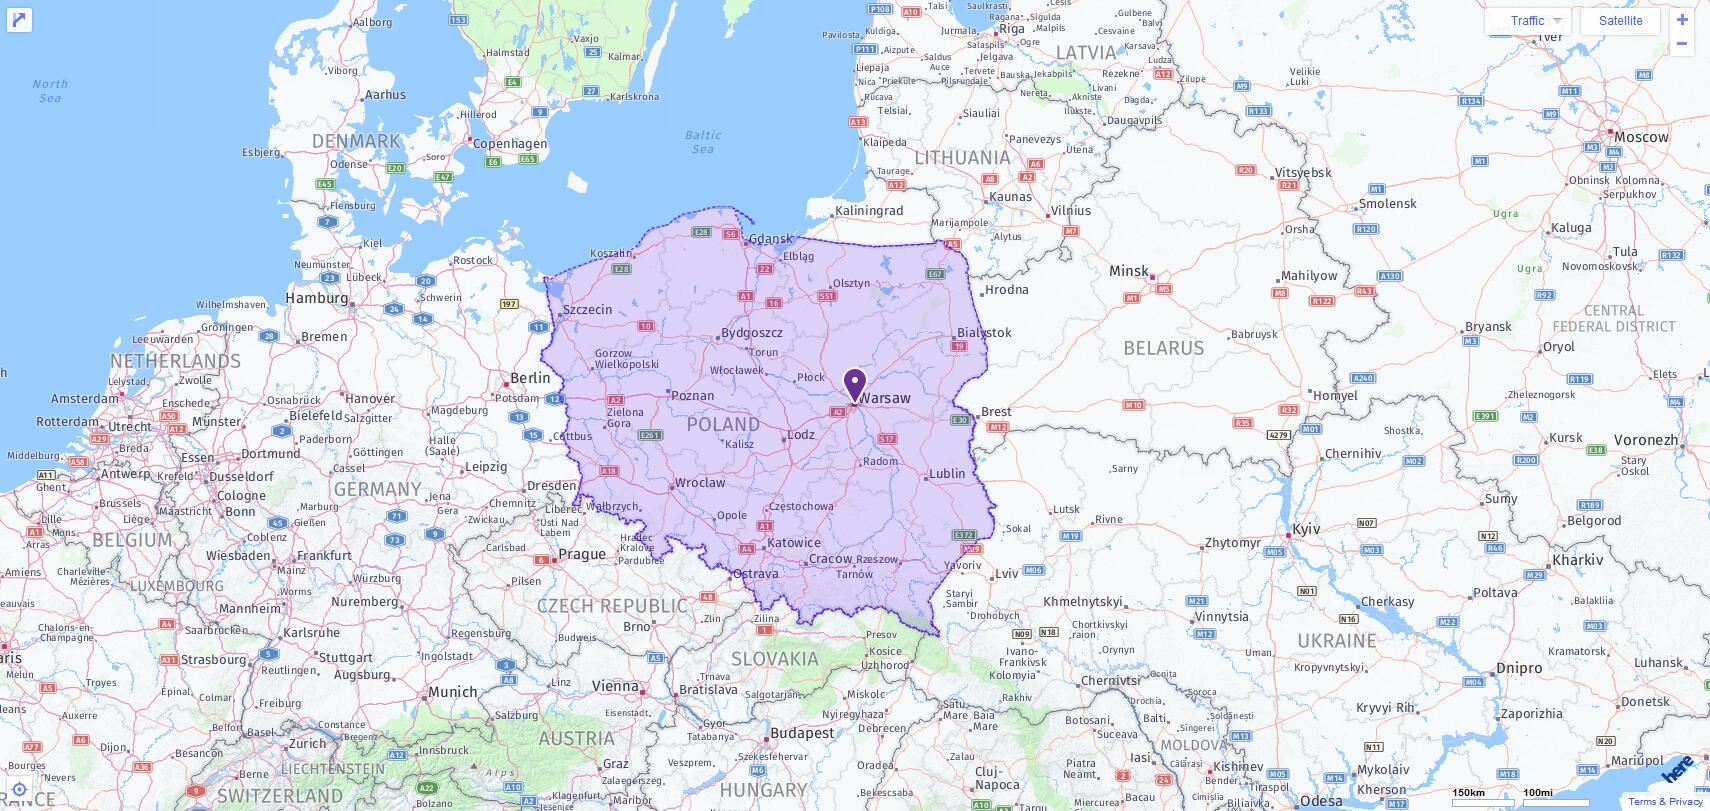 ACT Test Centers and Dates in Poland